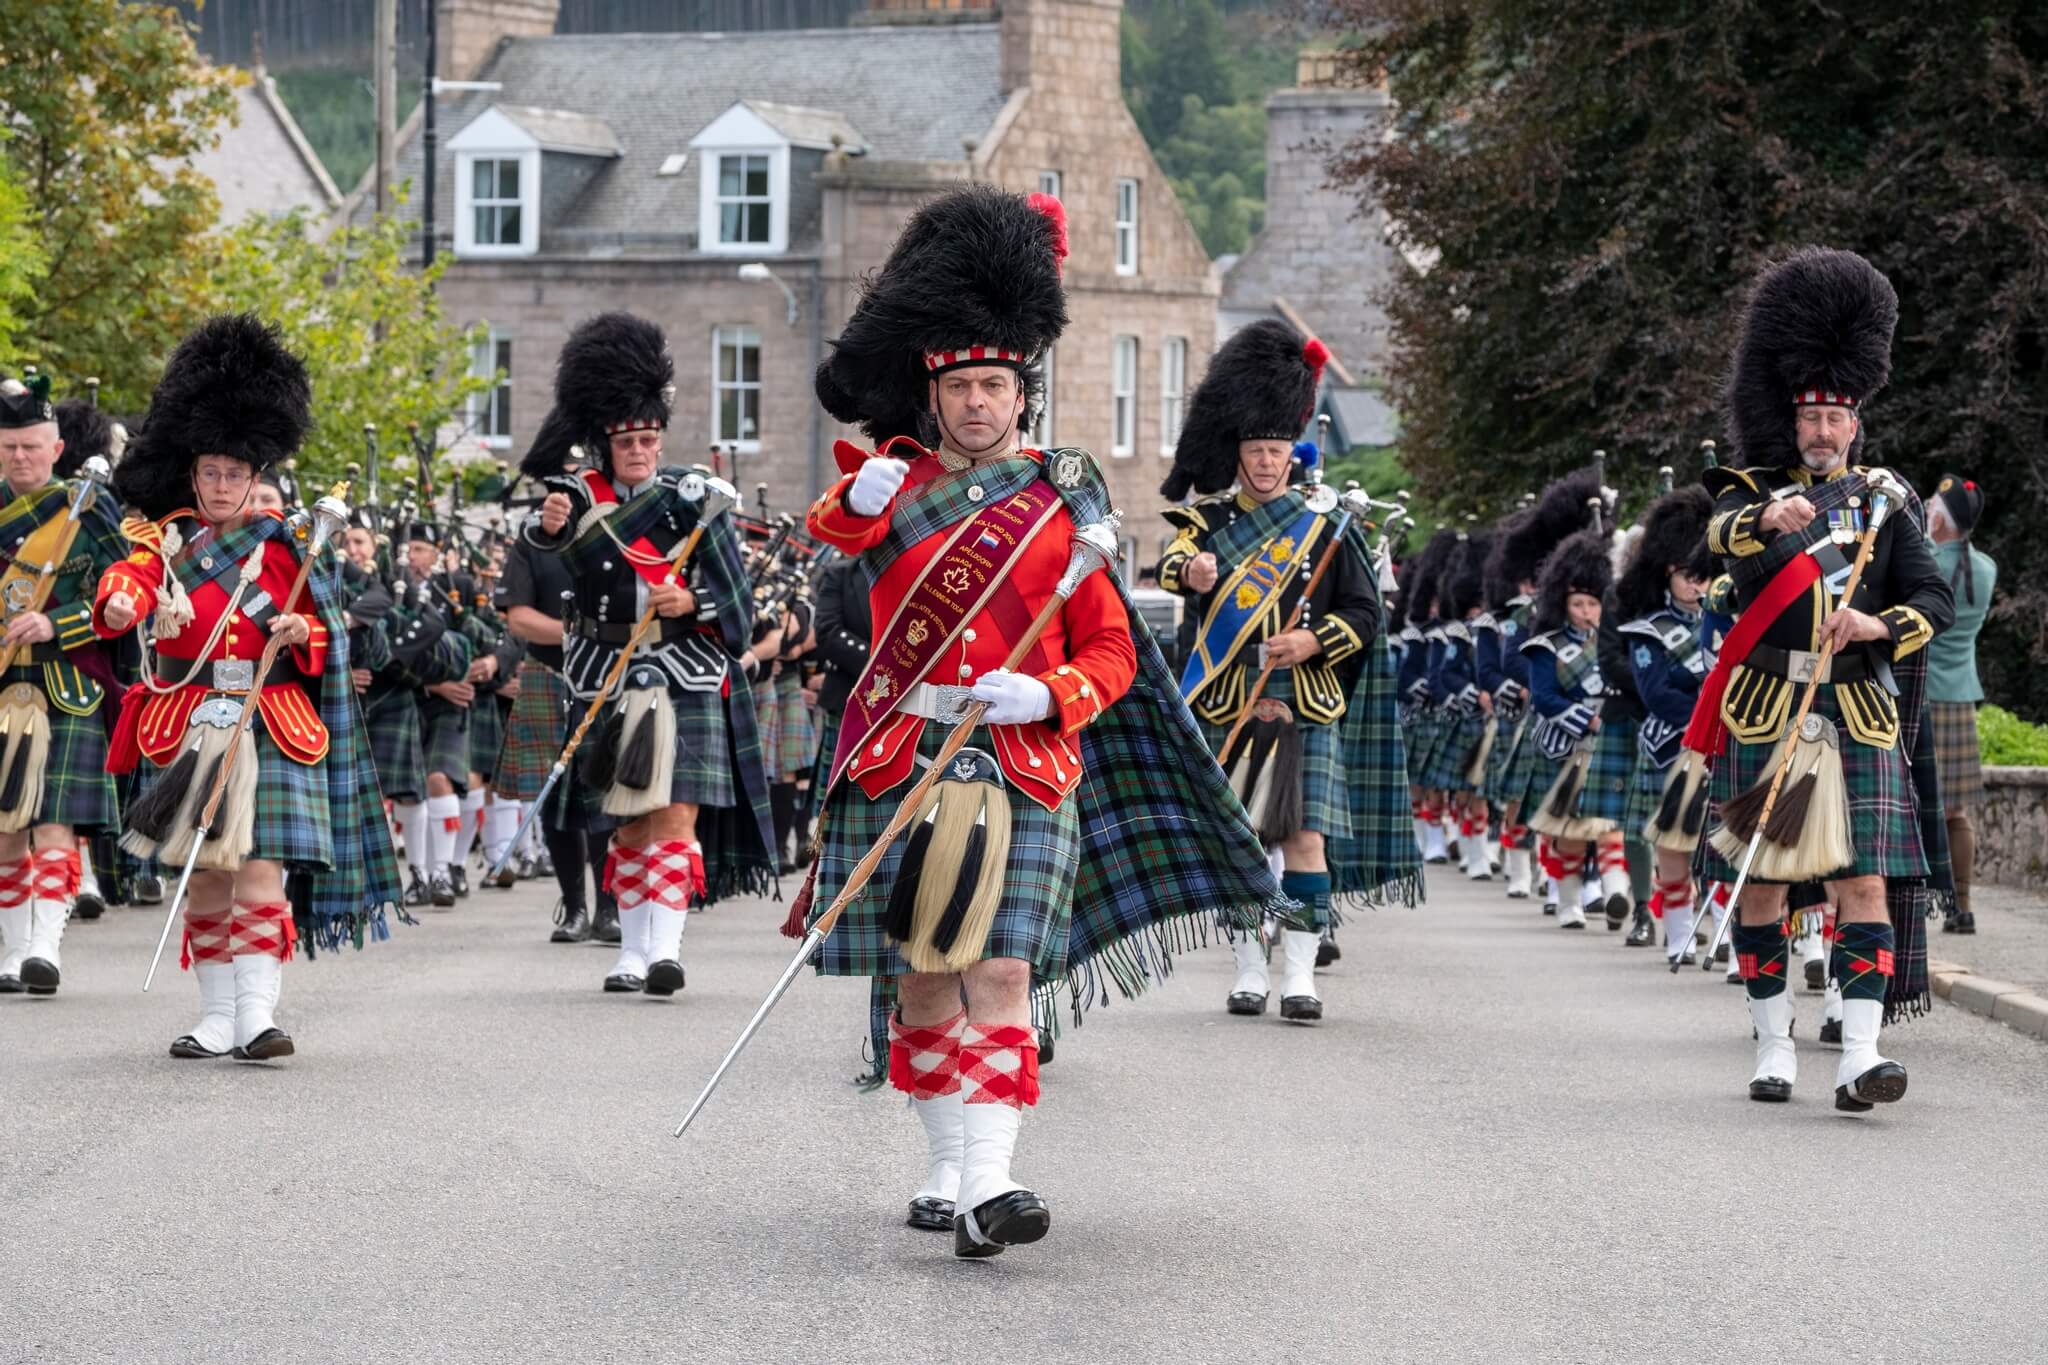 13-facts-about-royal-burgh-of-peebles-highland-games